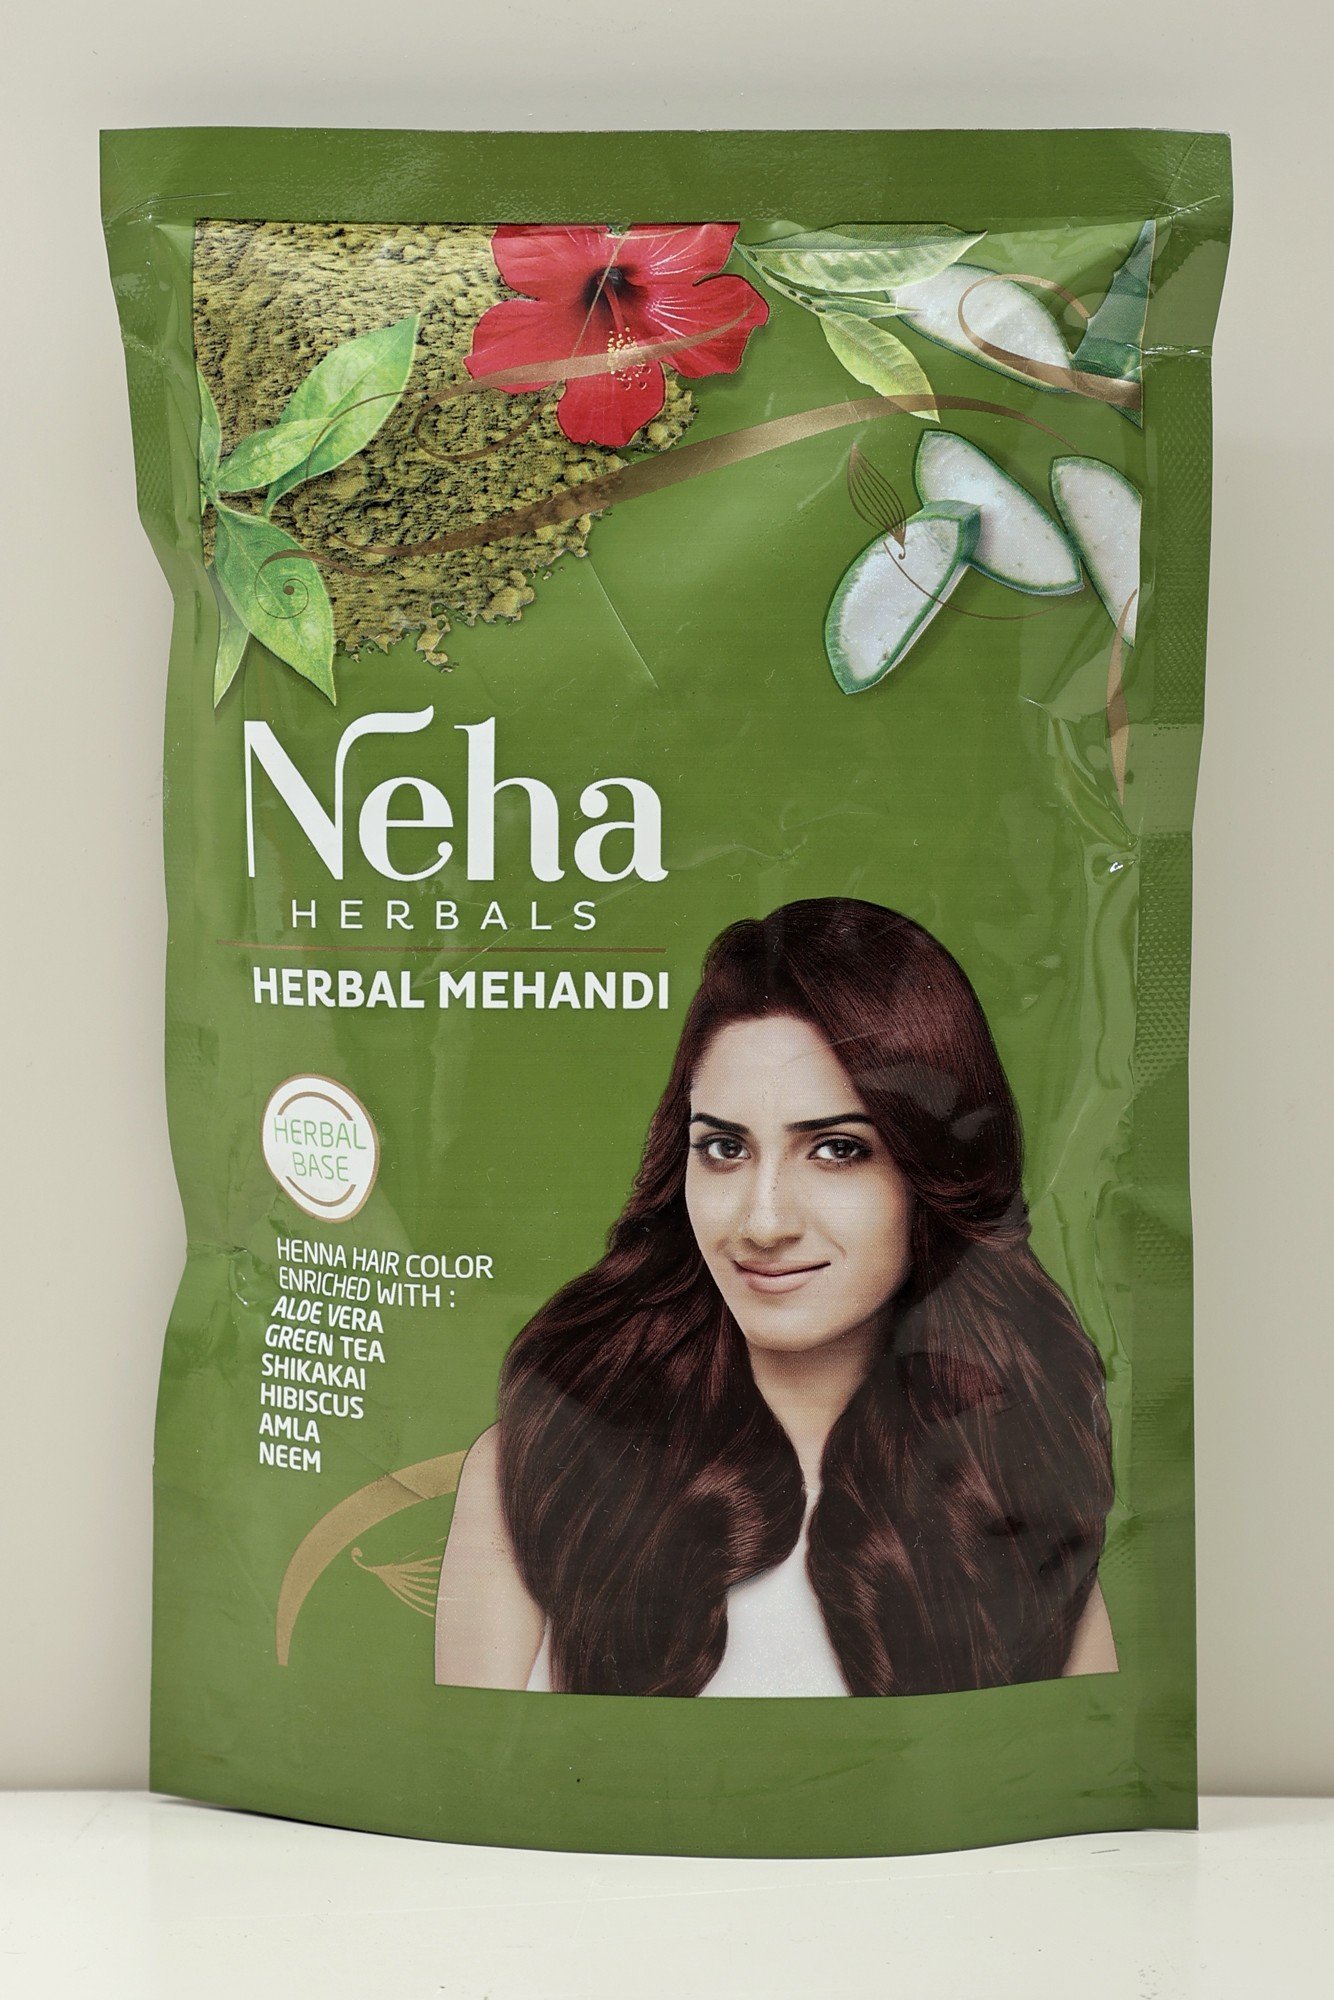 Neha Herbal Mehandi: Natural Coloring With Nature’s Goodness - book cover